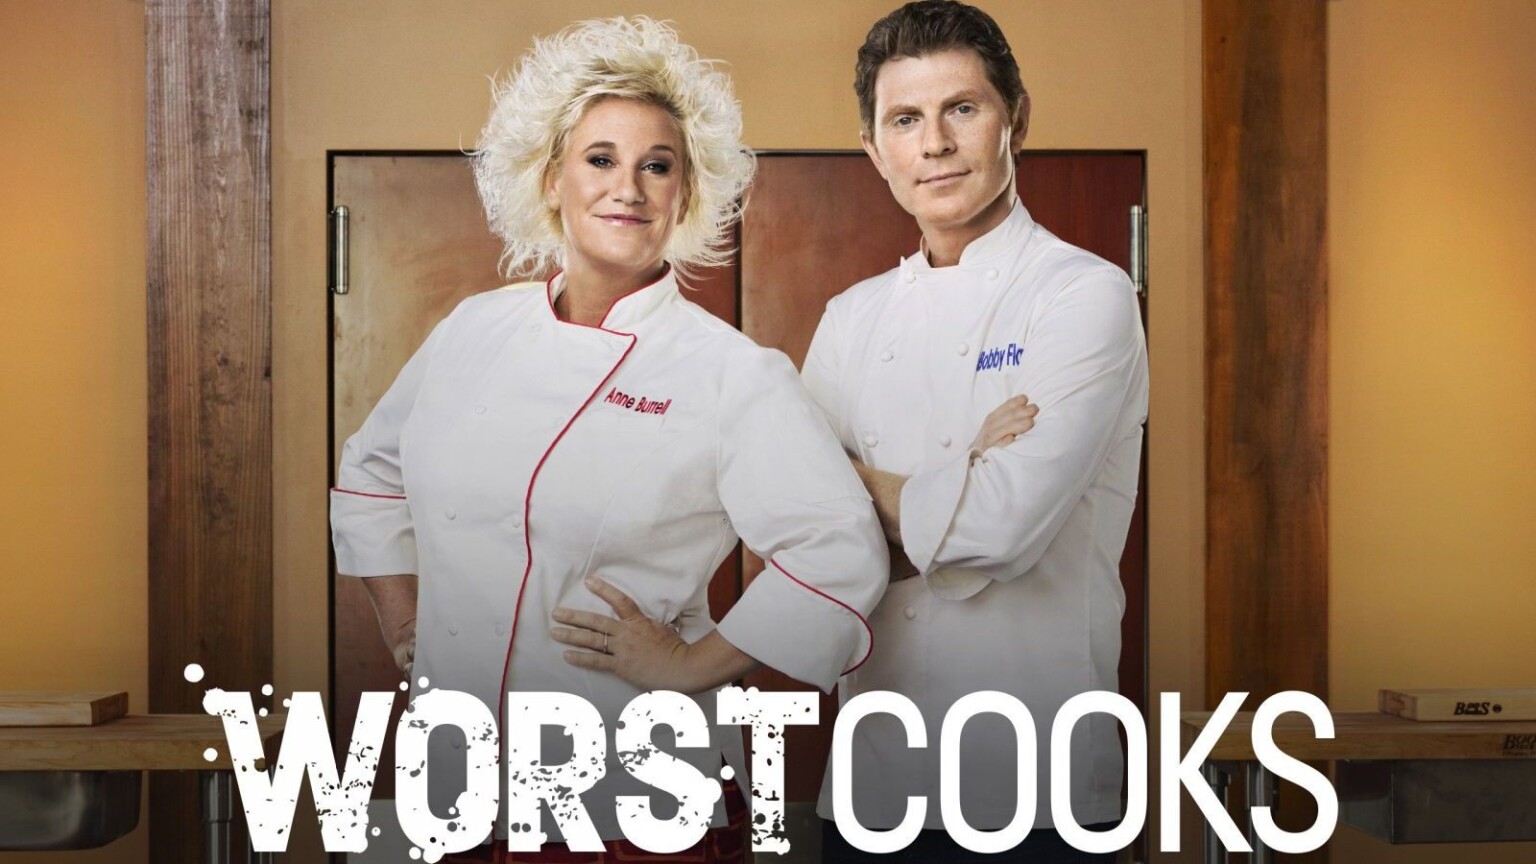 How to Watch Worst Cooks in America Celebrity Edition Season 19 Online